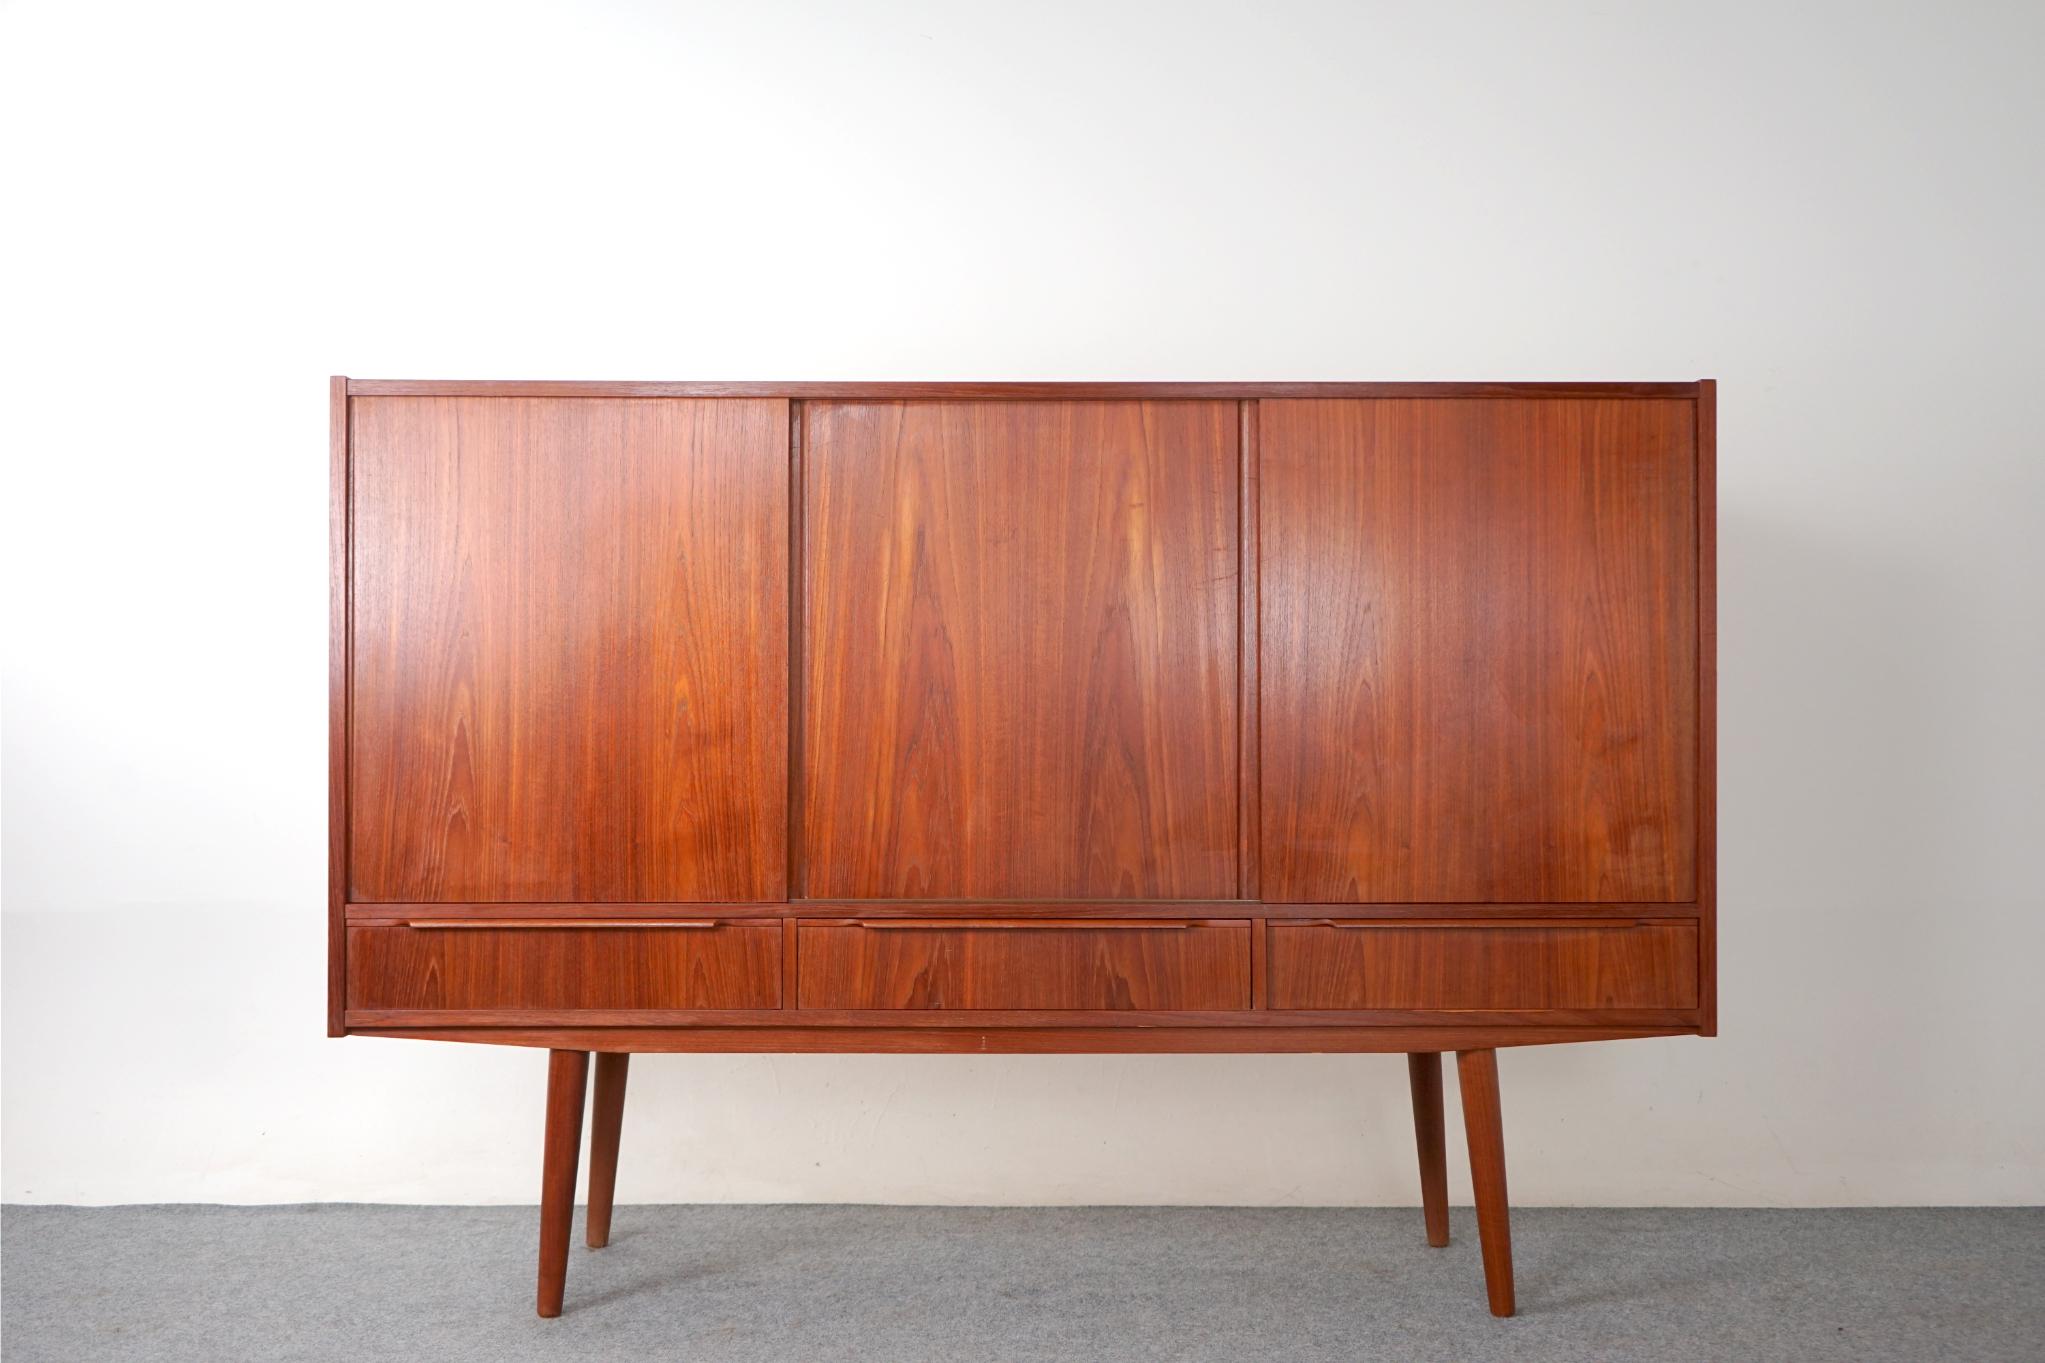 Teak Danish sideboard, circa 1960's. Clean, simple lined design with exceptional book-matched veneer. Sliding doors and exterior drawers offers ample storage. Interior bays are outfitted with removable shelving, side section offers a mirrored bar